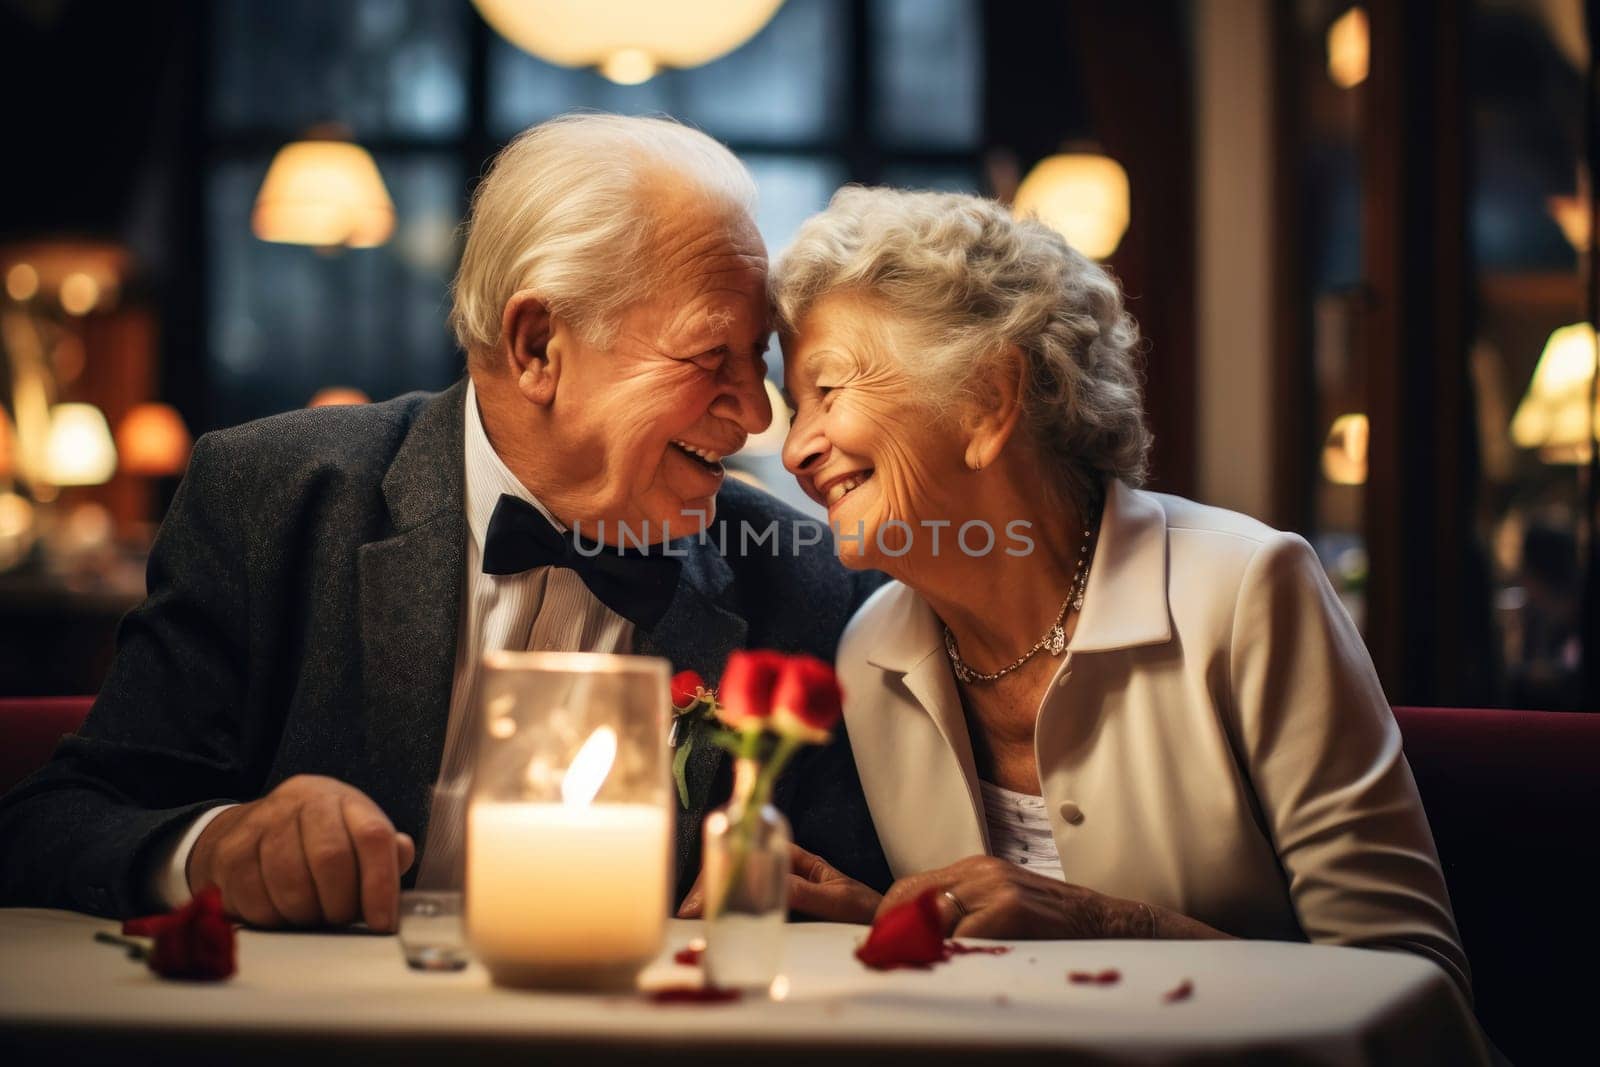 Happy elderly couple spending time together in romantic restaurant. Happy old aged family marriage anniversary celebration